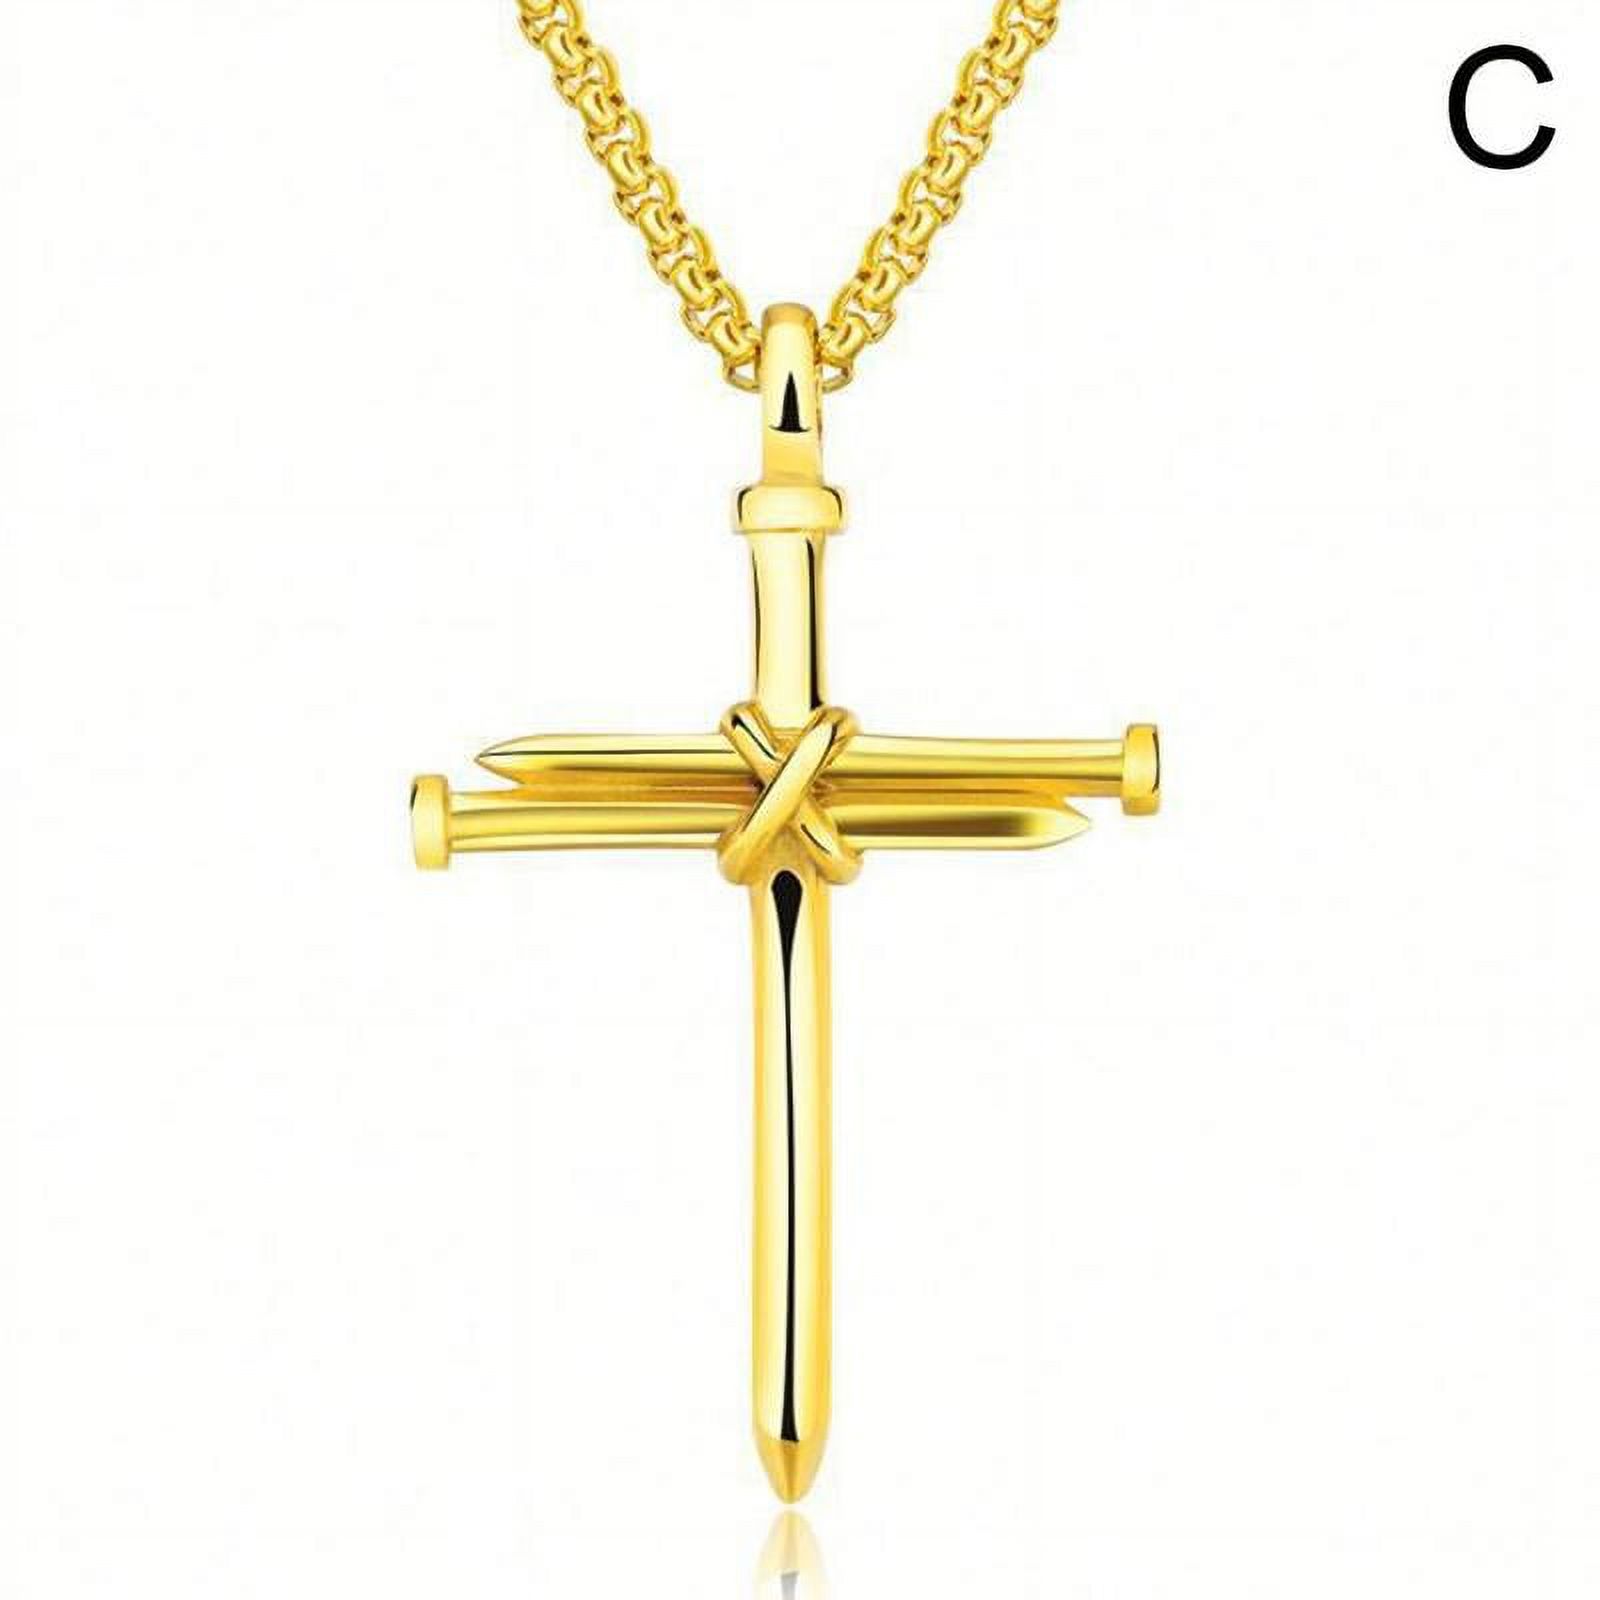 Men's Cross Necklace Cross Pendant Necklace Stainless Steel Nail and Rope Chain Necklaces Vintage Punk Choker Jewelry Gifts for Men Boys D9I0 - image 1 of 9